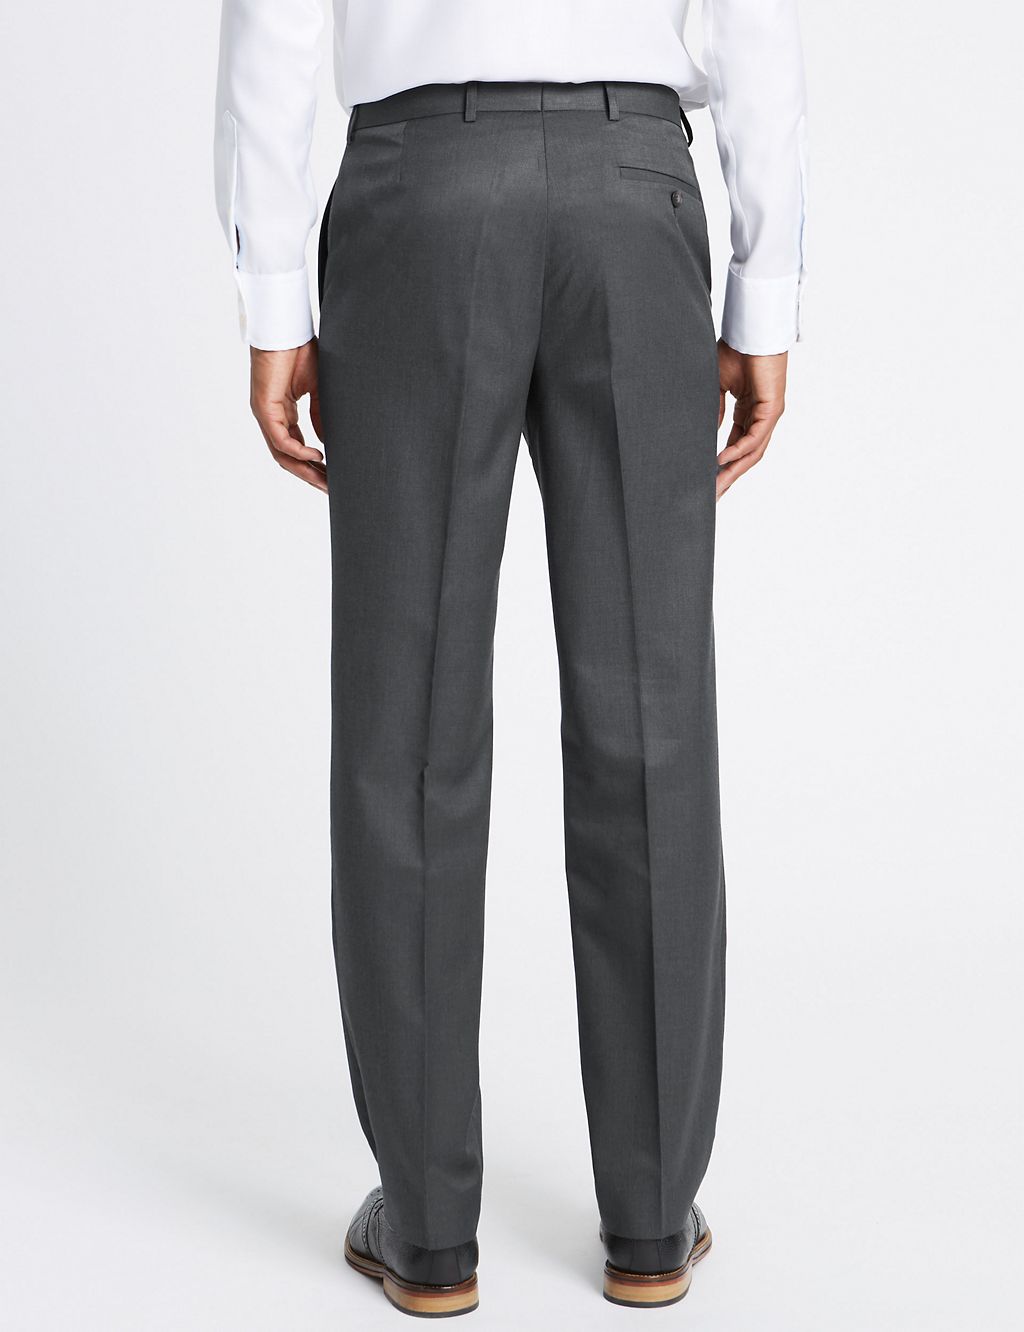 Charcoal Textured Regular Fit Trousers 4 of 6